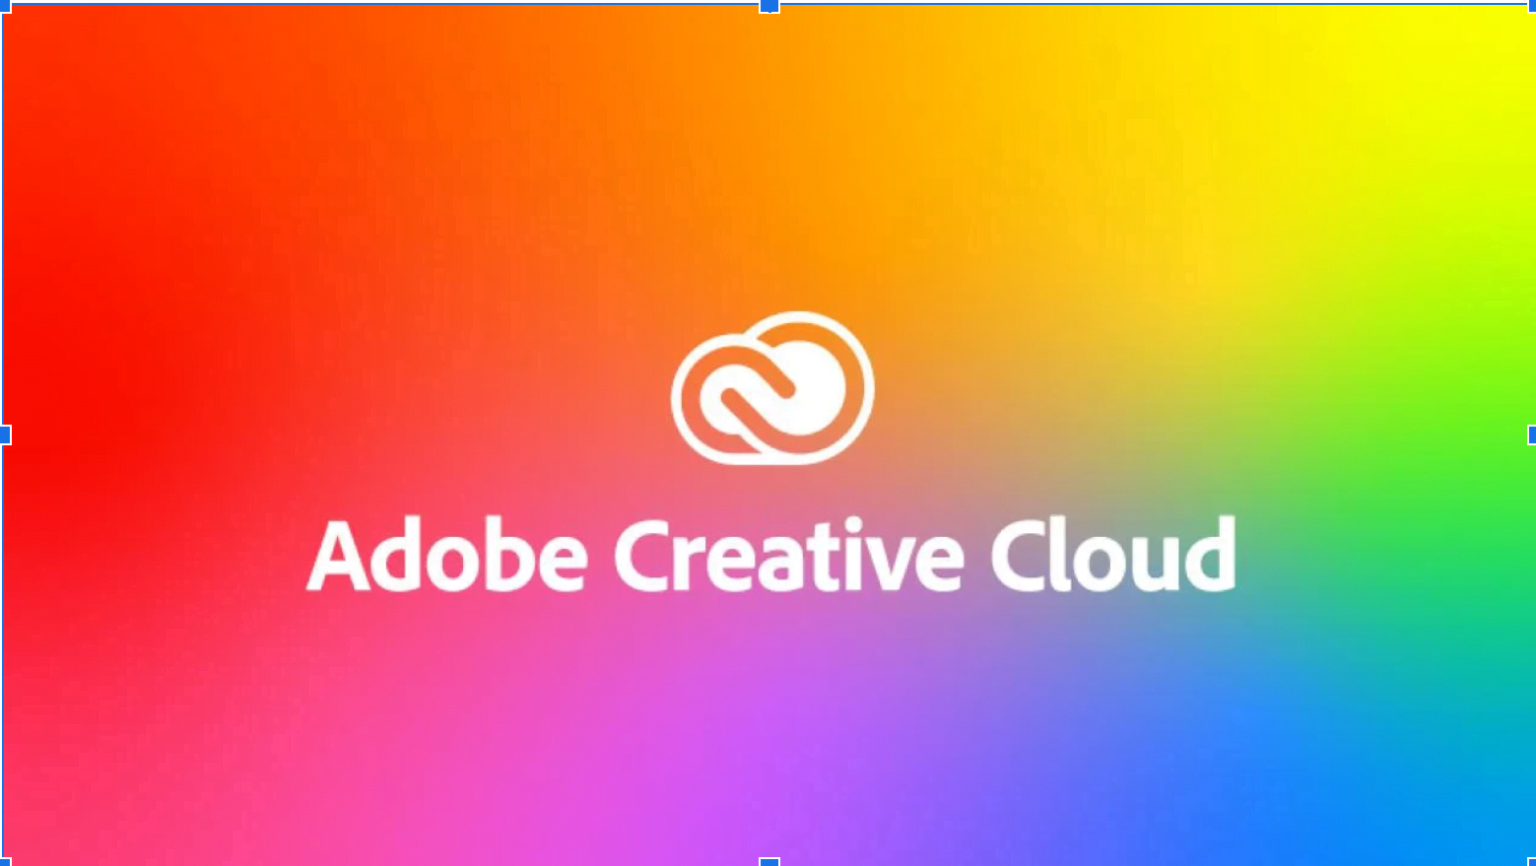 Adobe Creative Cloud Is Essential For Designers